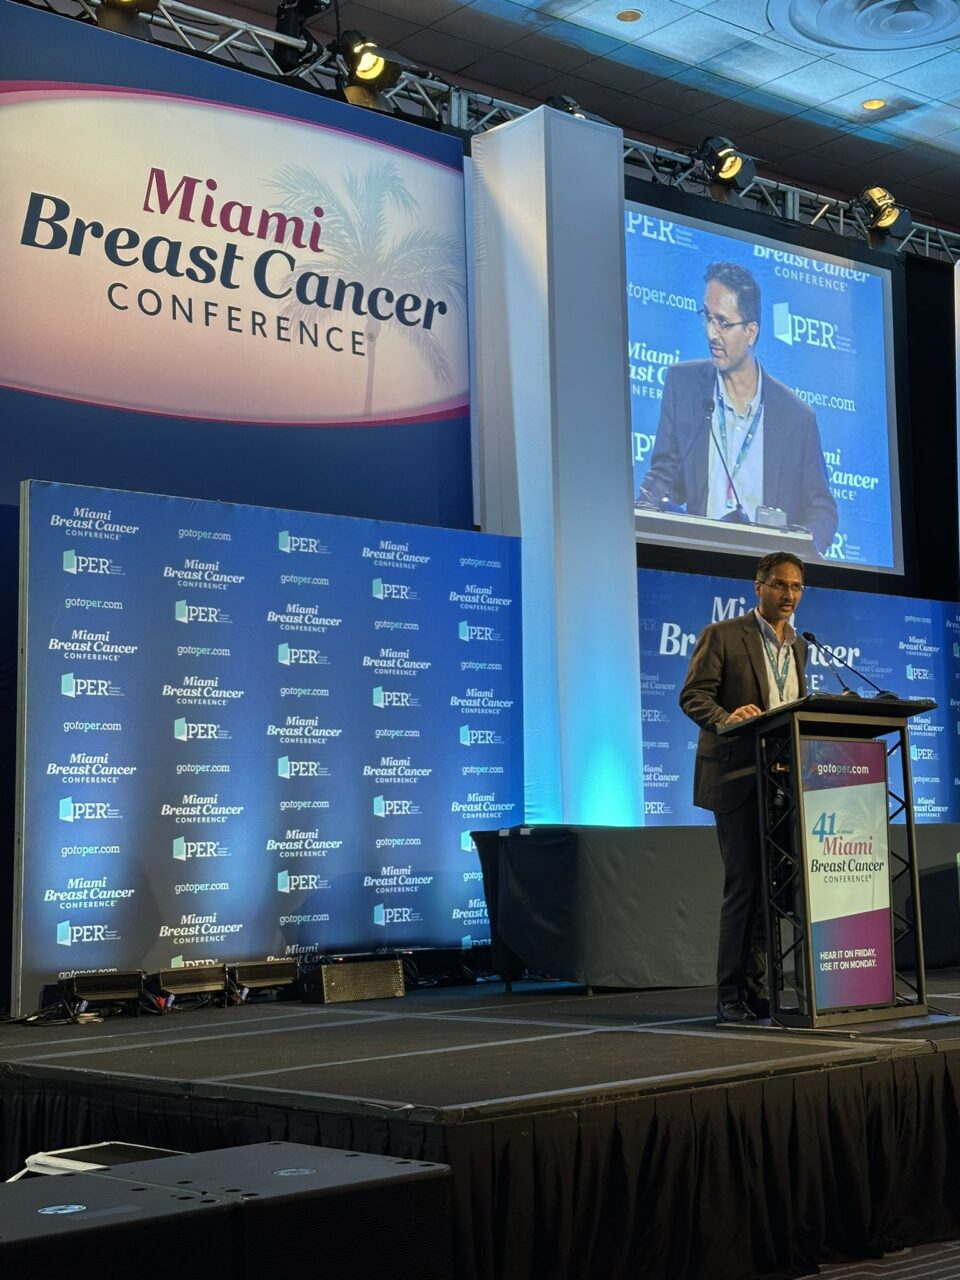 Hope Rugo: MBCC24 Keynote speaker Anant Madabhusbi discusses machine based learning in breast and other cancers